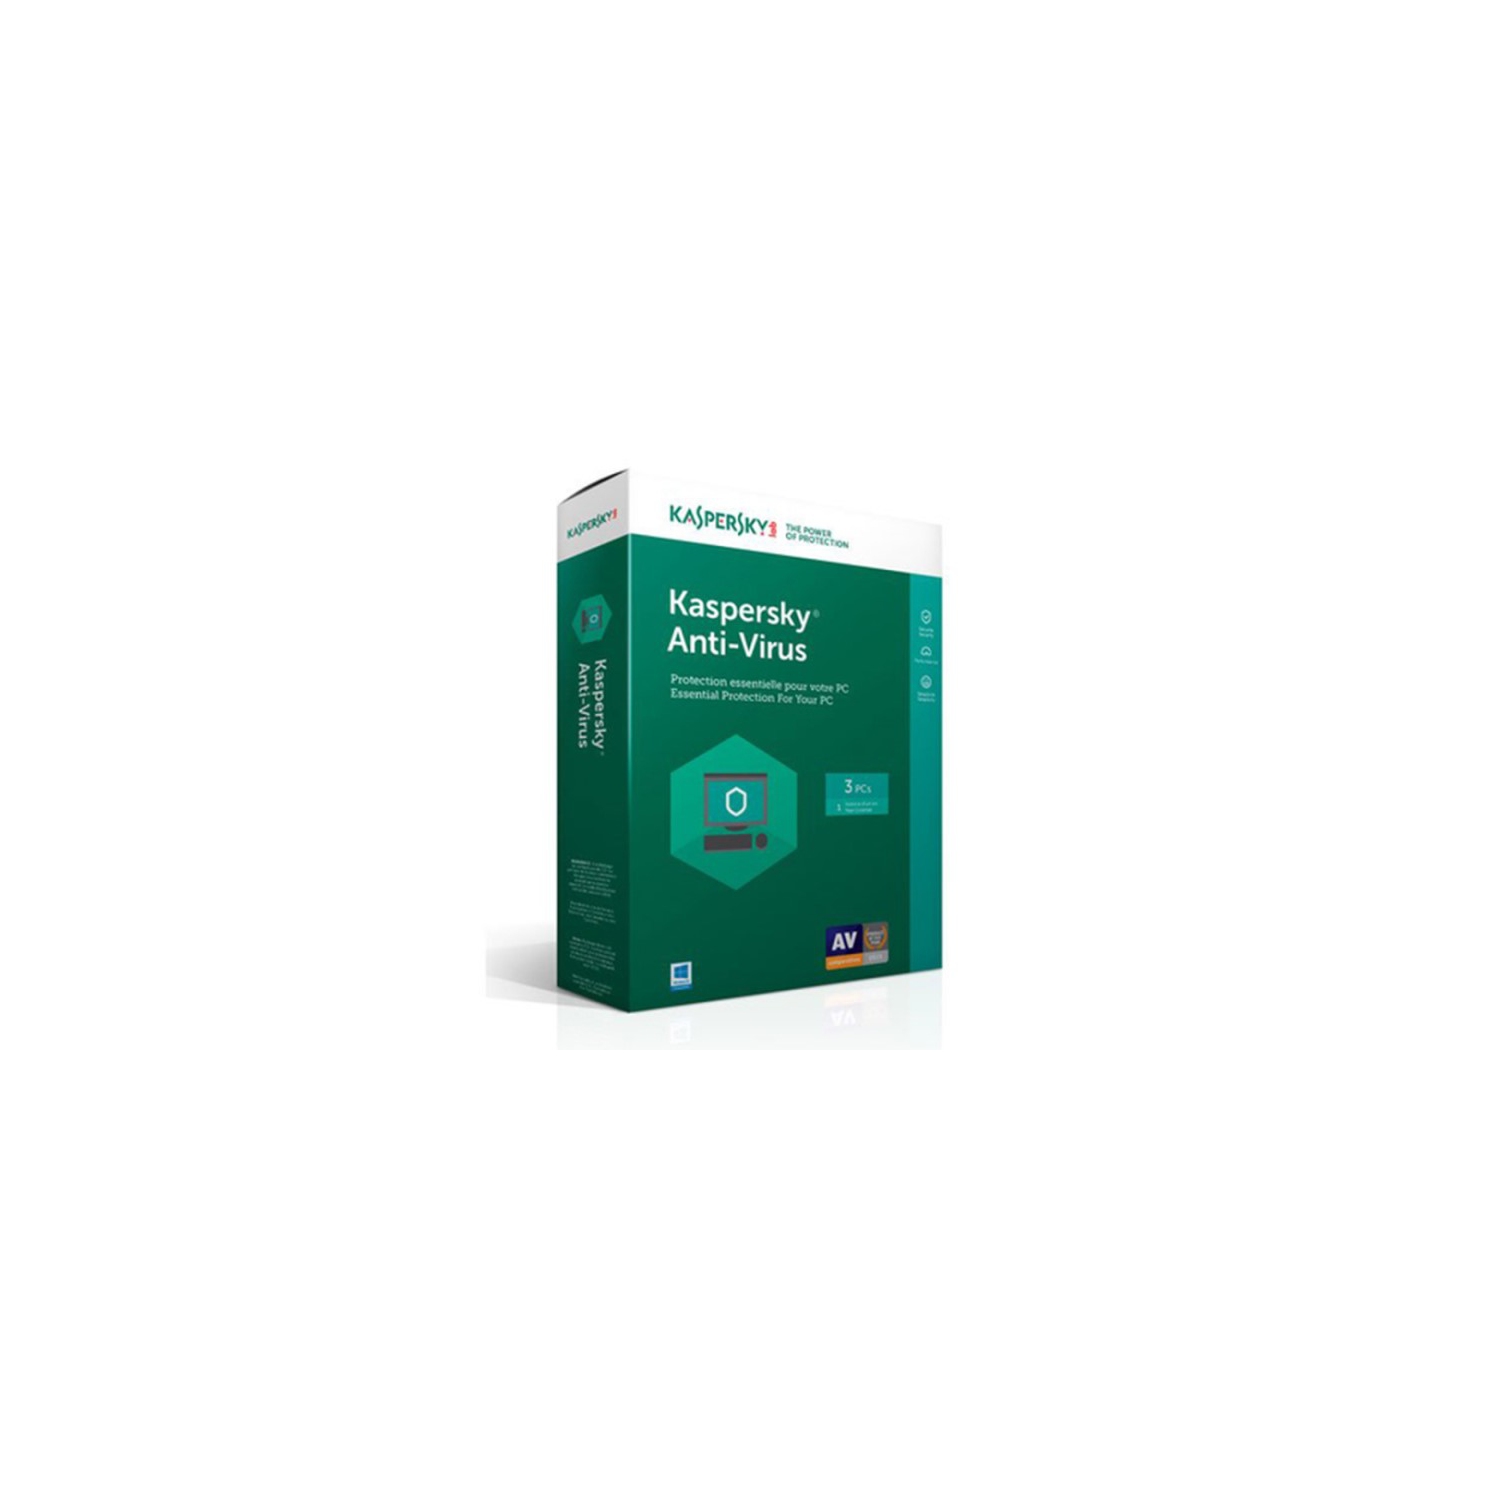 Kaspersky Antivirus 3-User Bilingual Eng/French (KEY CARD ONLY)(FREE SHIPPING)